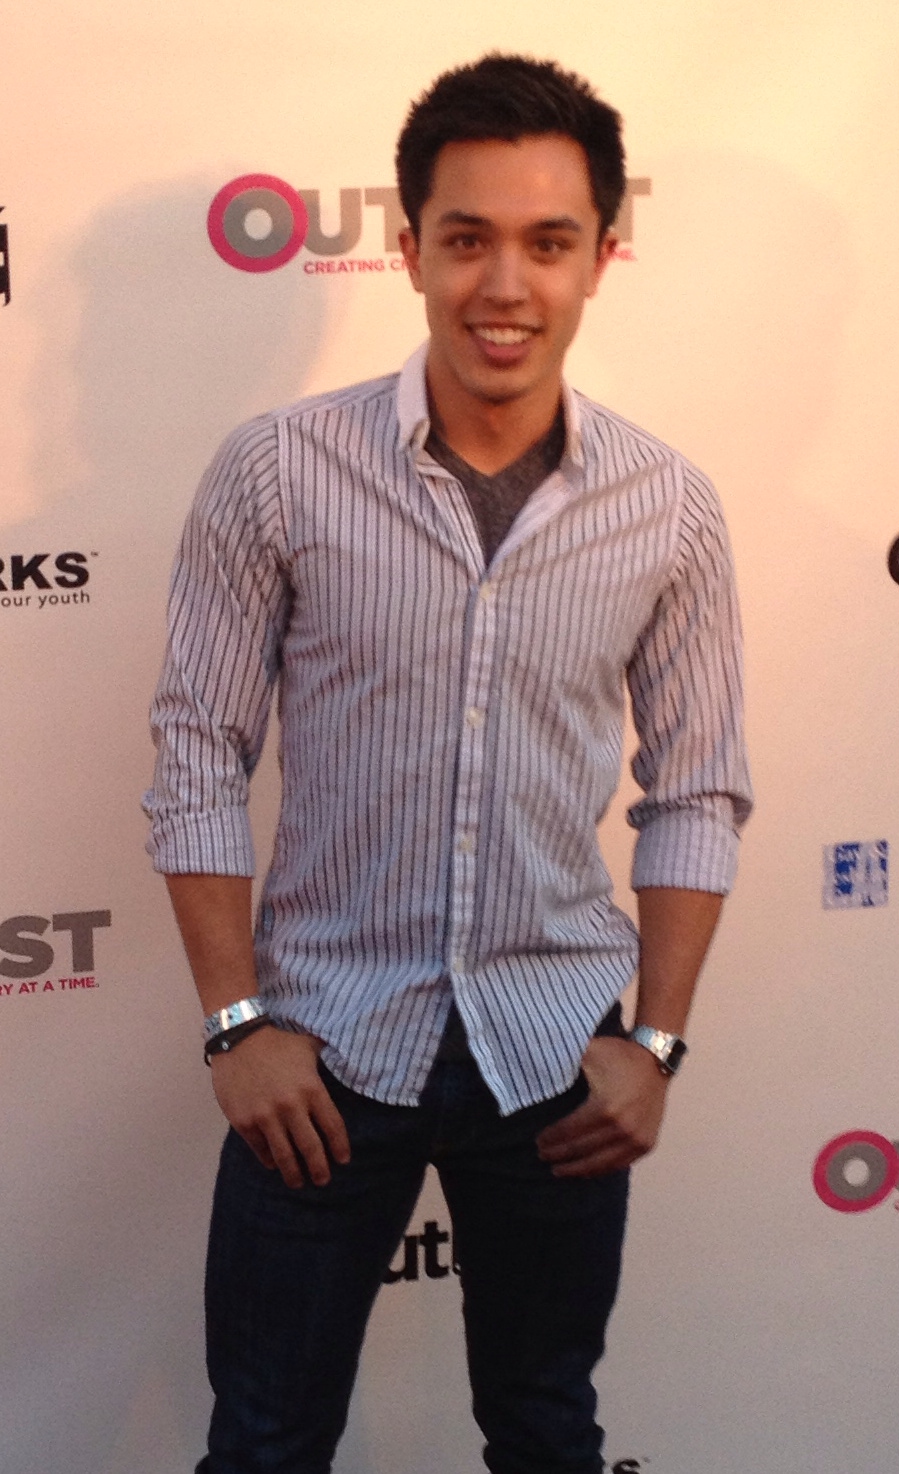 Lee at the 2013 OutSet Shorts Premiere on the Sony lot in Culver City, CA.